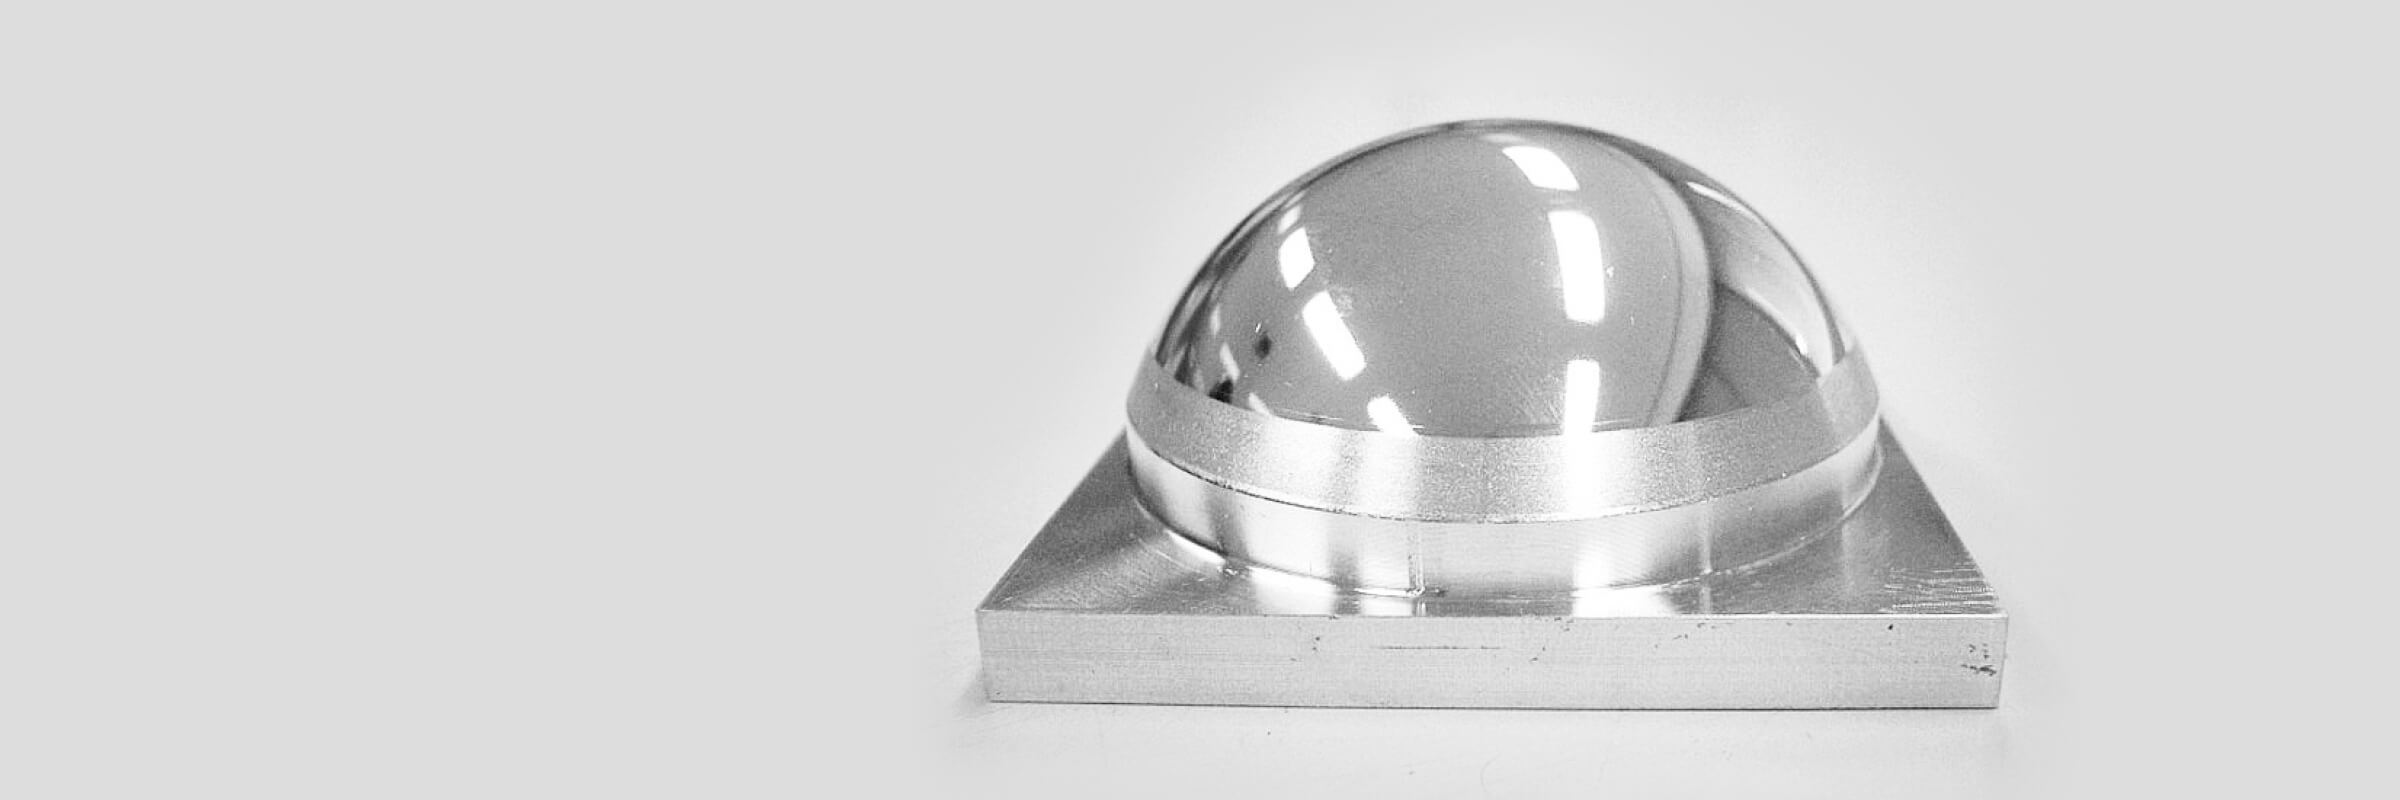 Super-NURBS Cuts Curved Surfaces with Accuracy and Speed - Completing Parts on the Machine